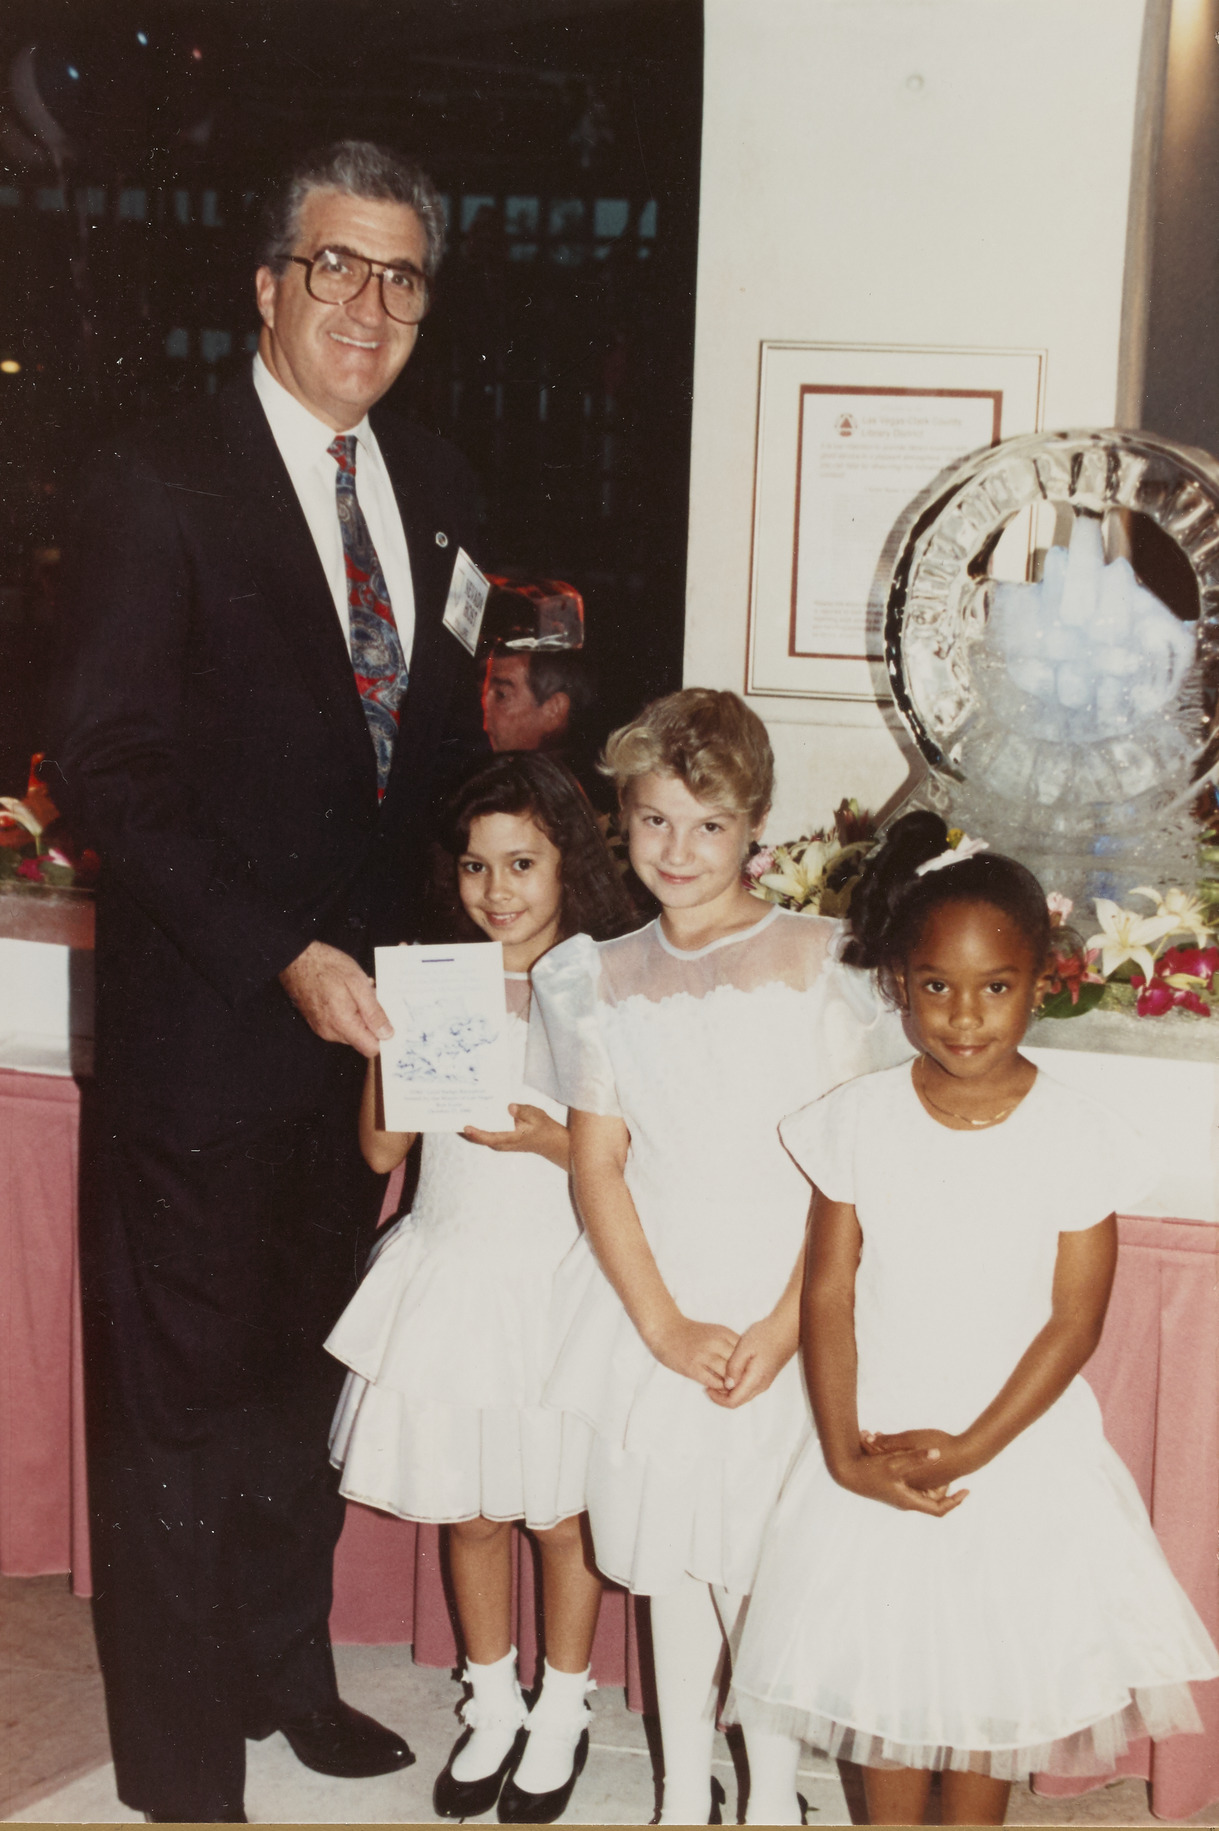 Photograph of Ron Lurie with children at the IDRC Reception at the Children's Museum and Library